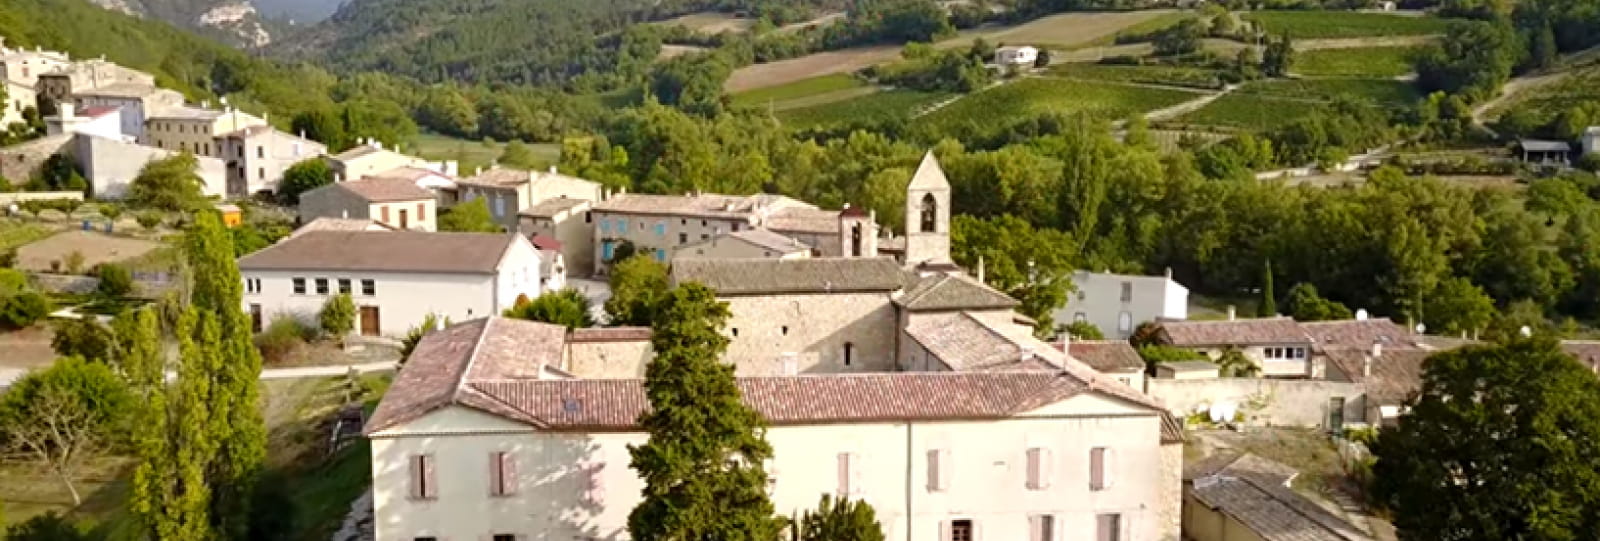 The Old Monastery of Sainte-Croix Welcome Centre